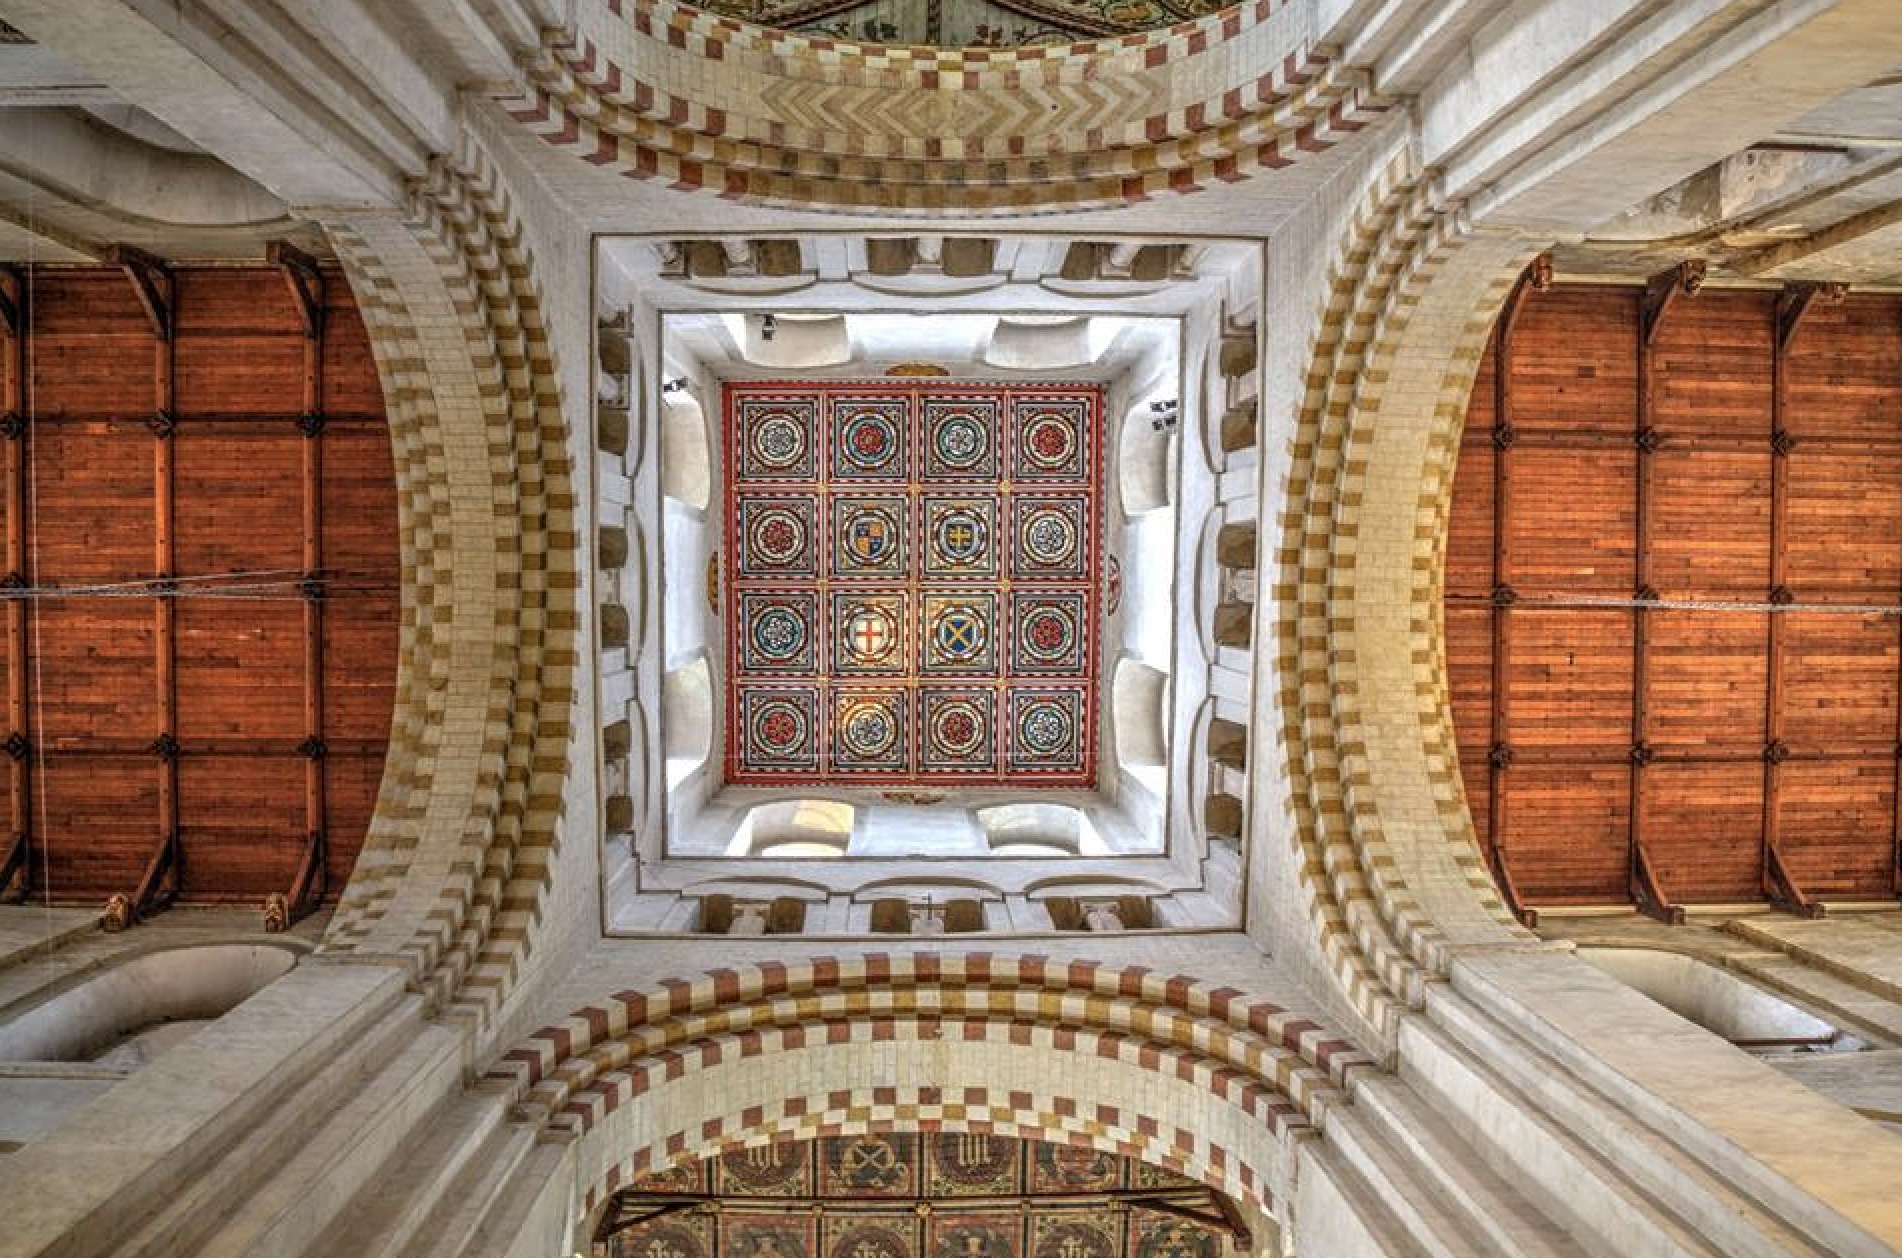 St Albans Cathedral Ceiling - Always Look Up